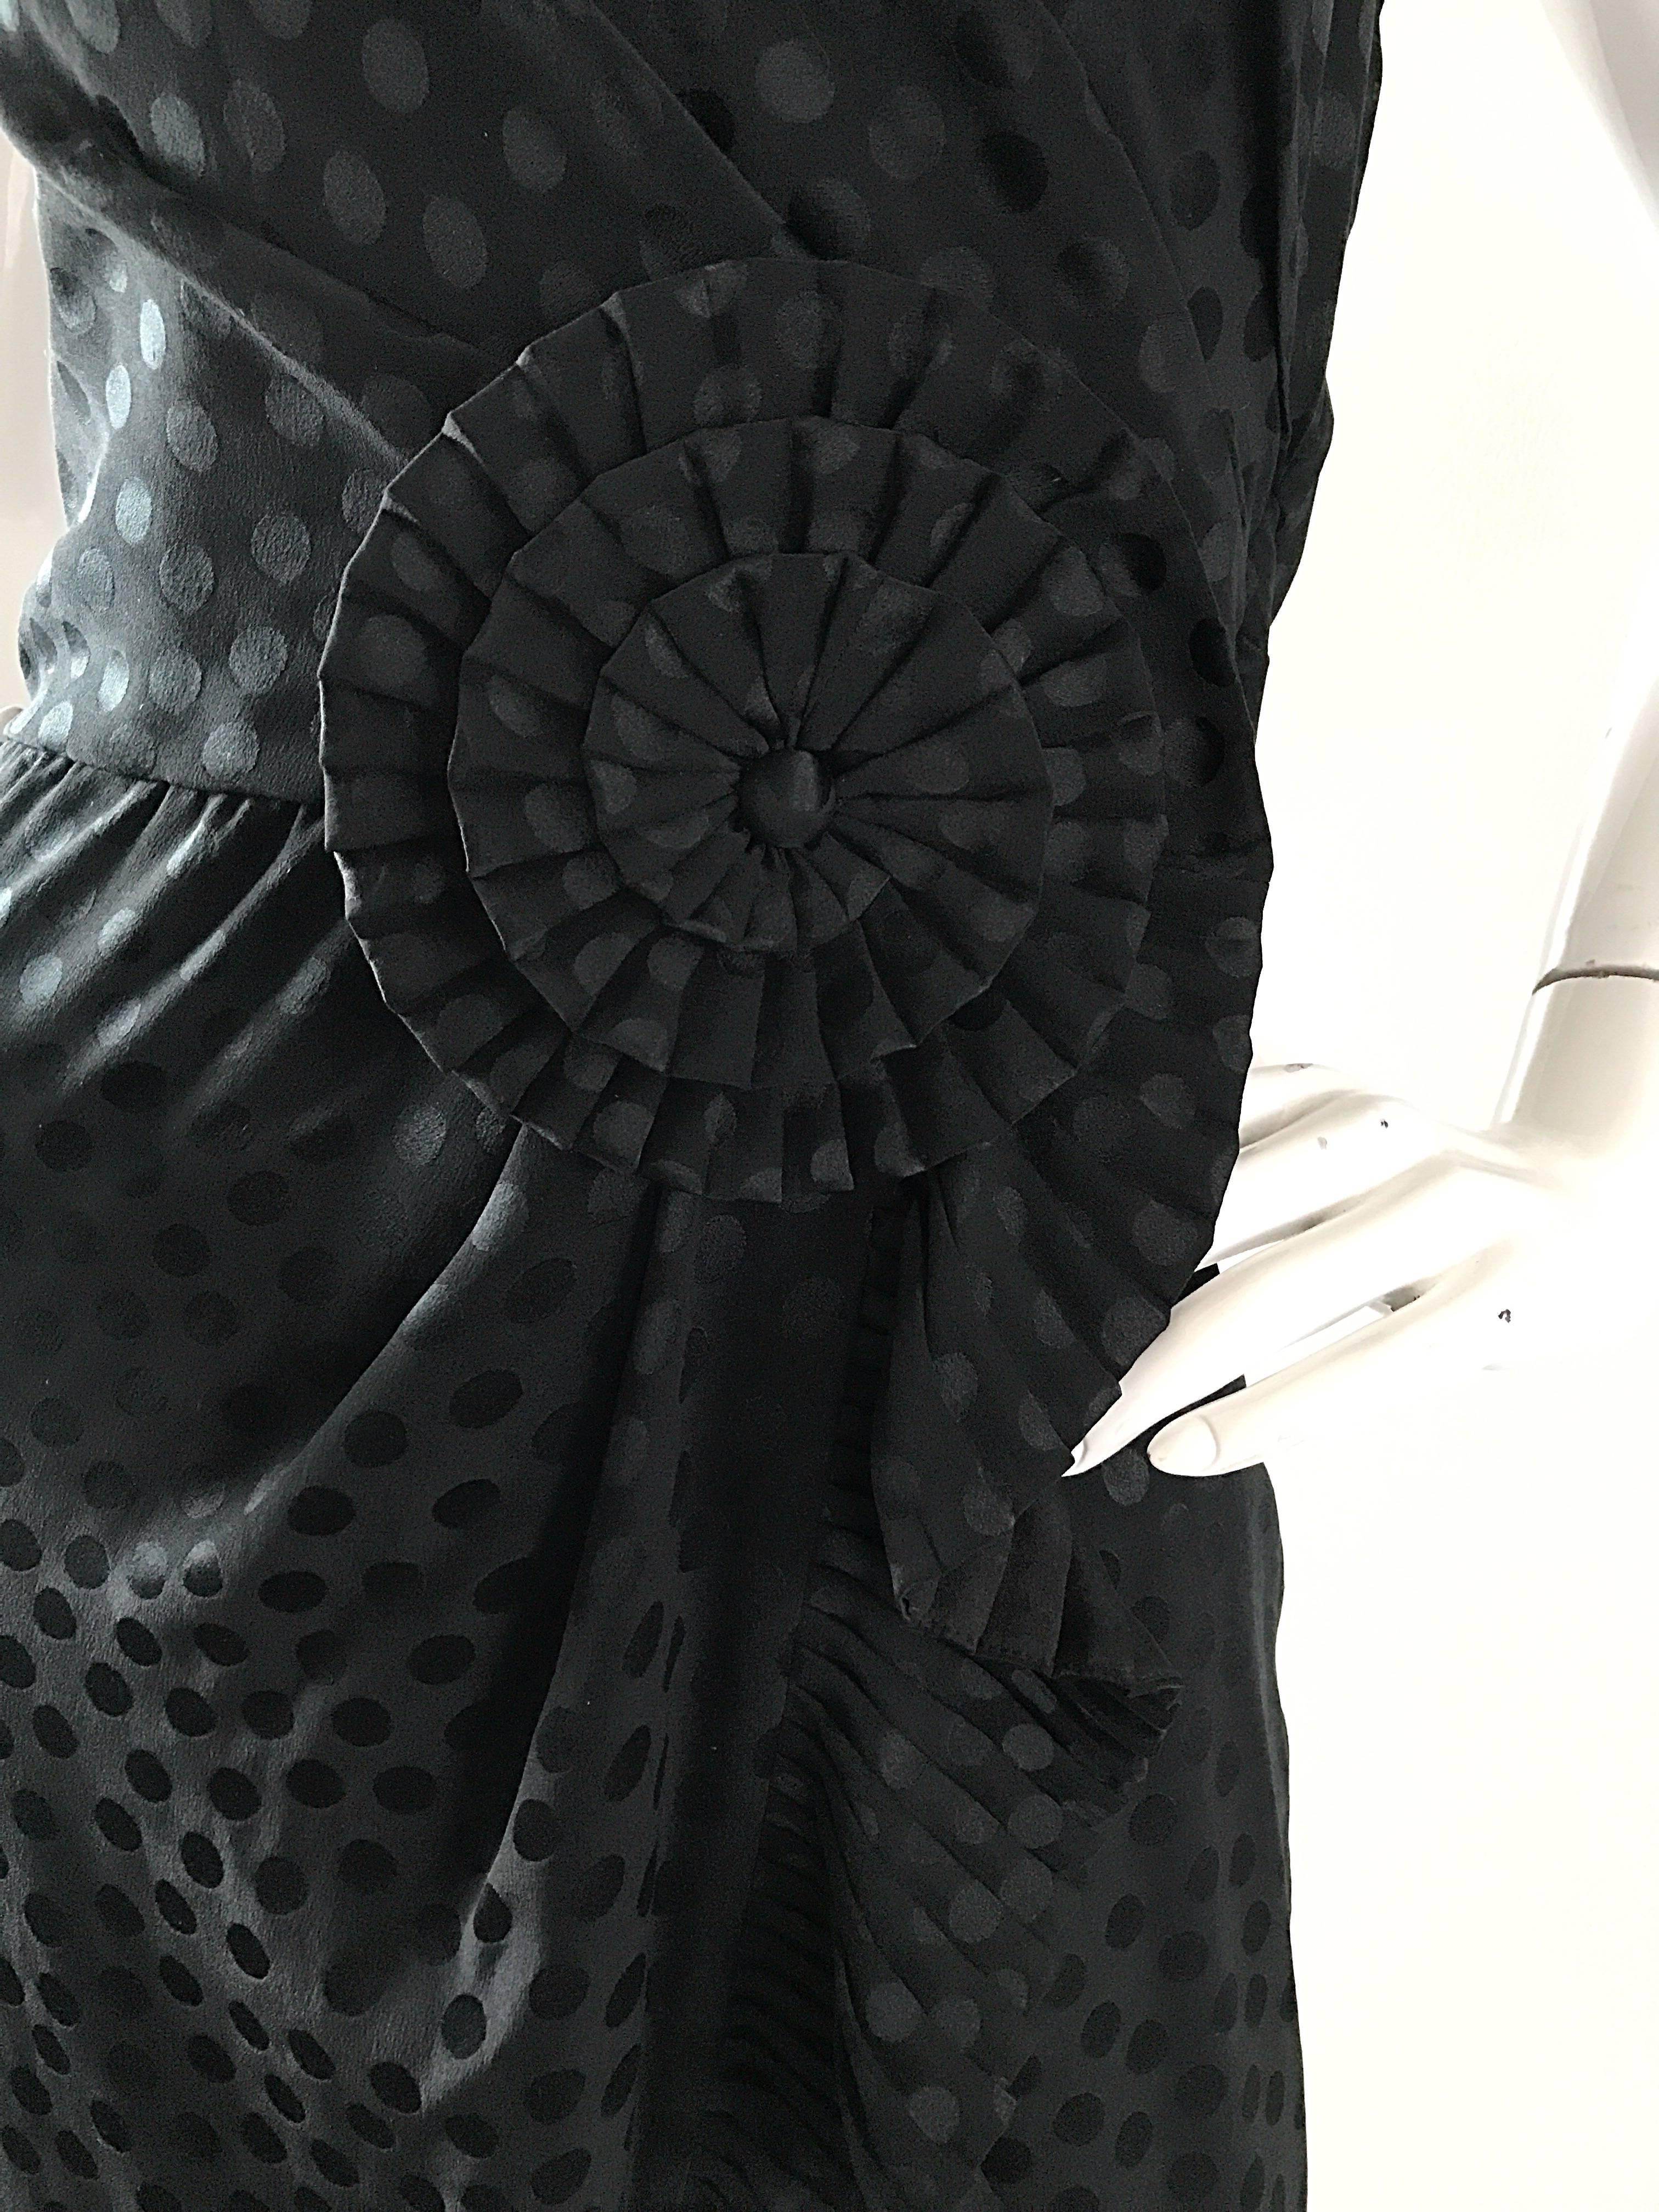 Vintage Albert Nipon 1990s Black Polka Dot Origami Strapless Silk Dress Size 6 In Excellent Condition For Sale In San Diego, CA